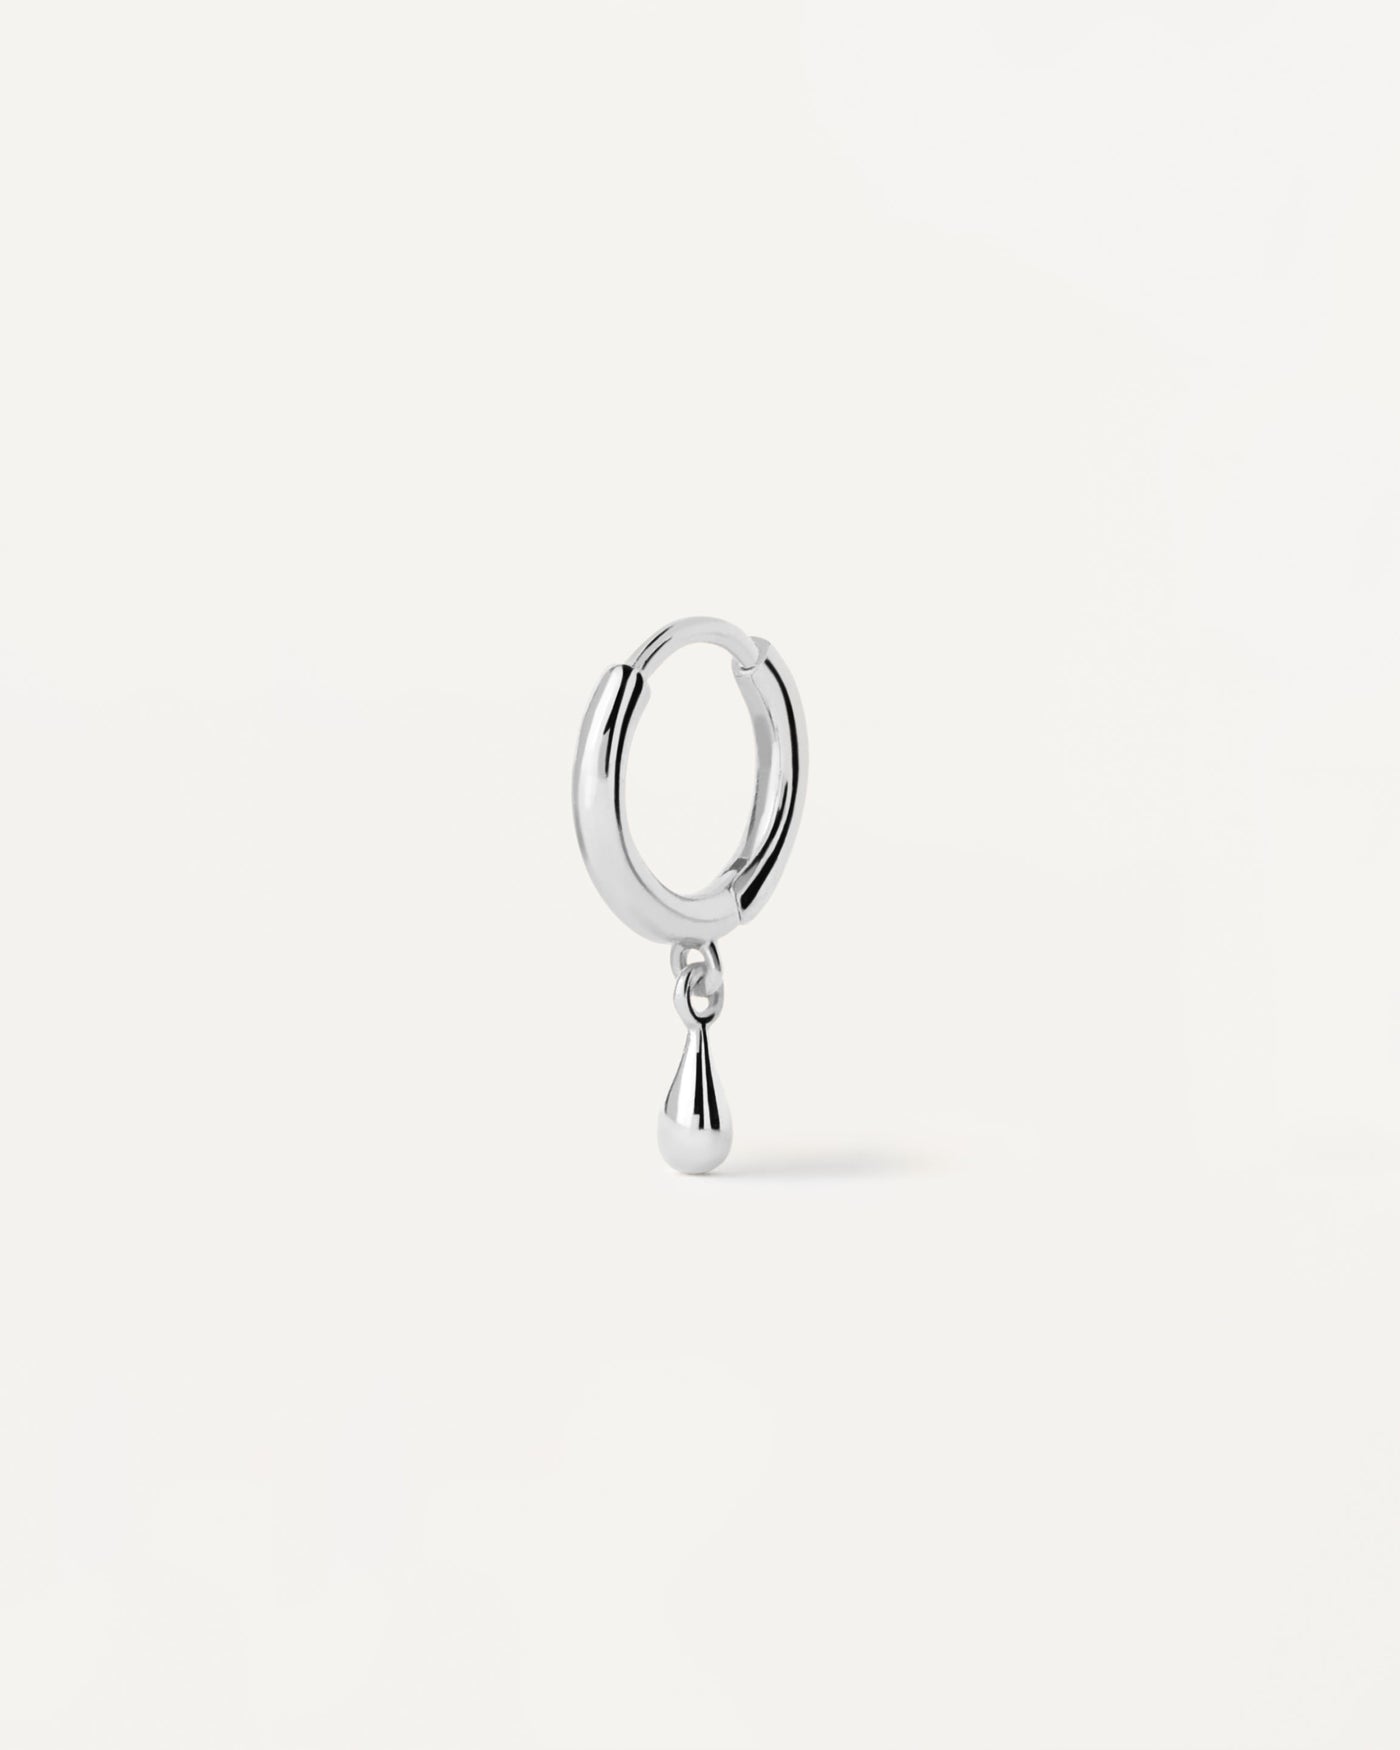 2023 Selection | Teardrop silver single hoop Earring. Sterling silver ear piercing with small drop pendant. Get the latest arrival from PDPAOLA. Place your order safely and get this Best Seller. Free Shipping.